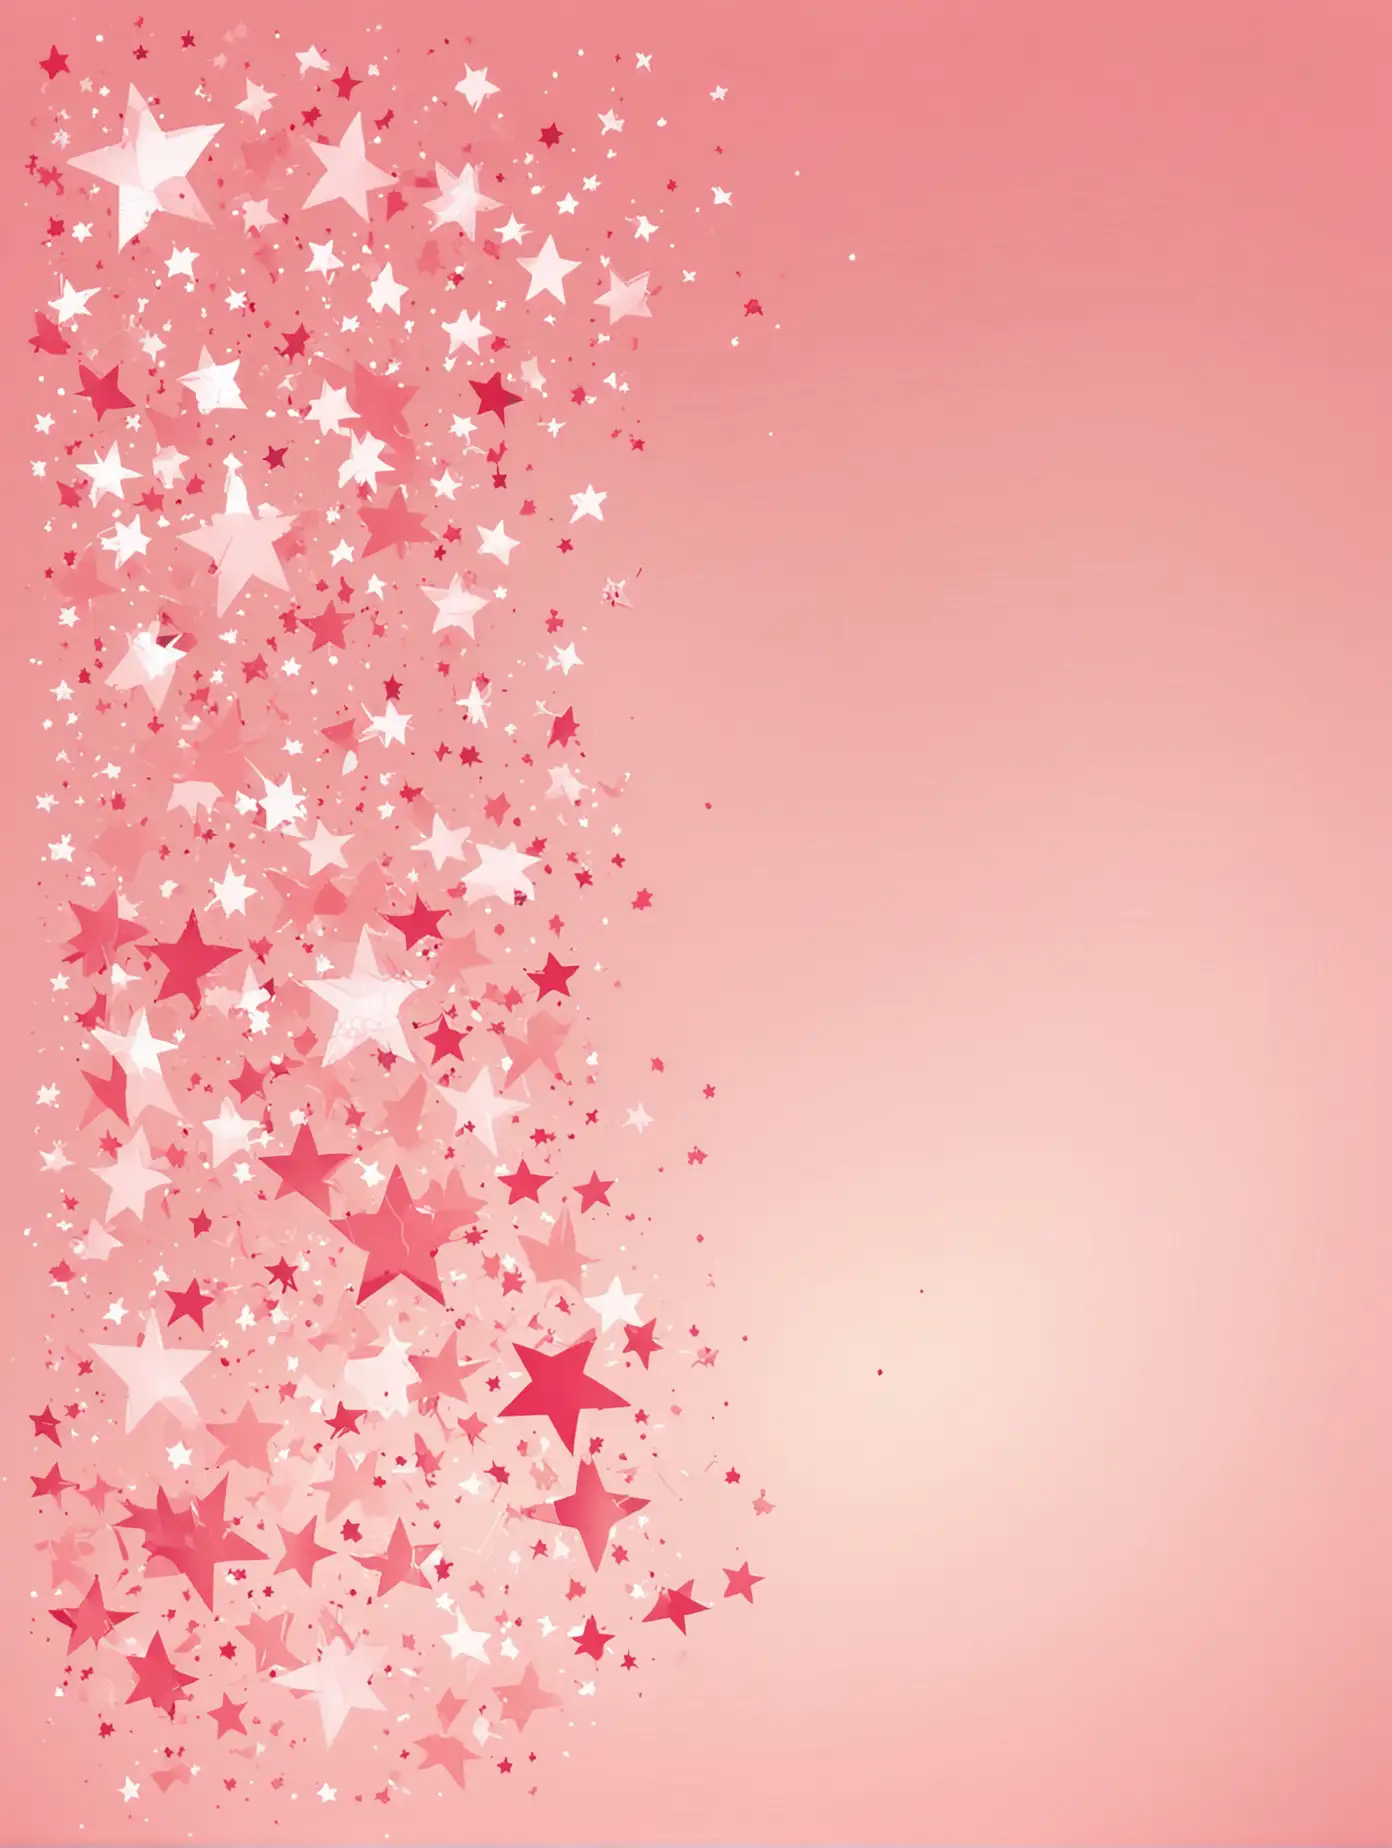 vector Pink stars of different sizes on a white-beige sky background